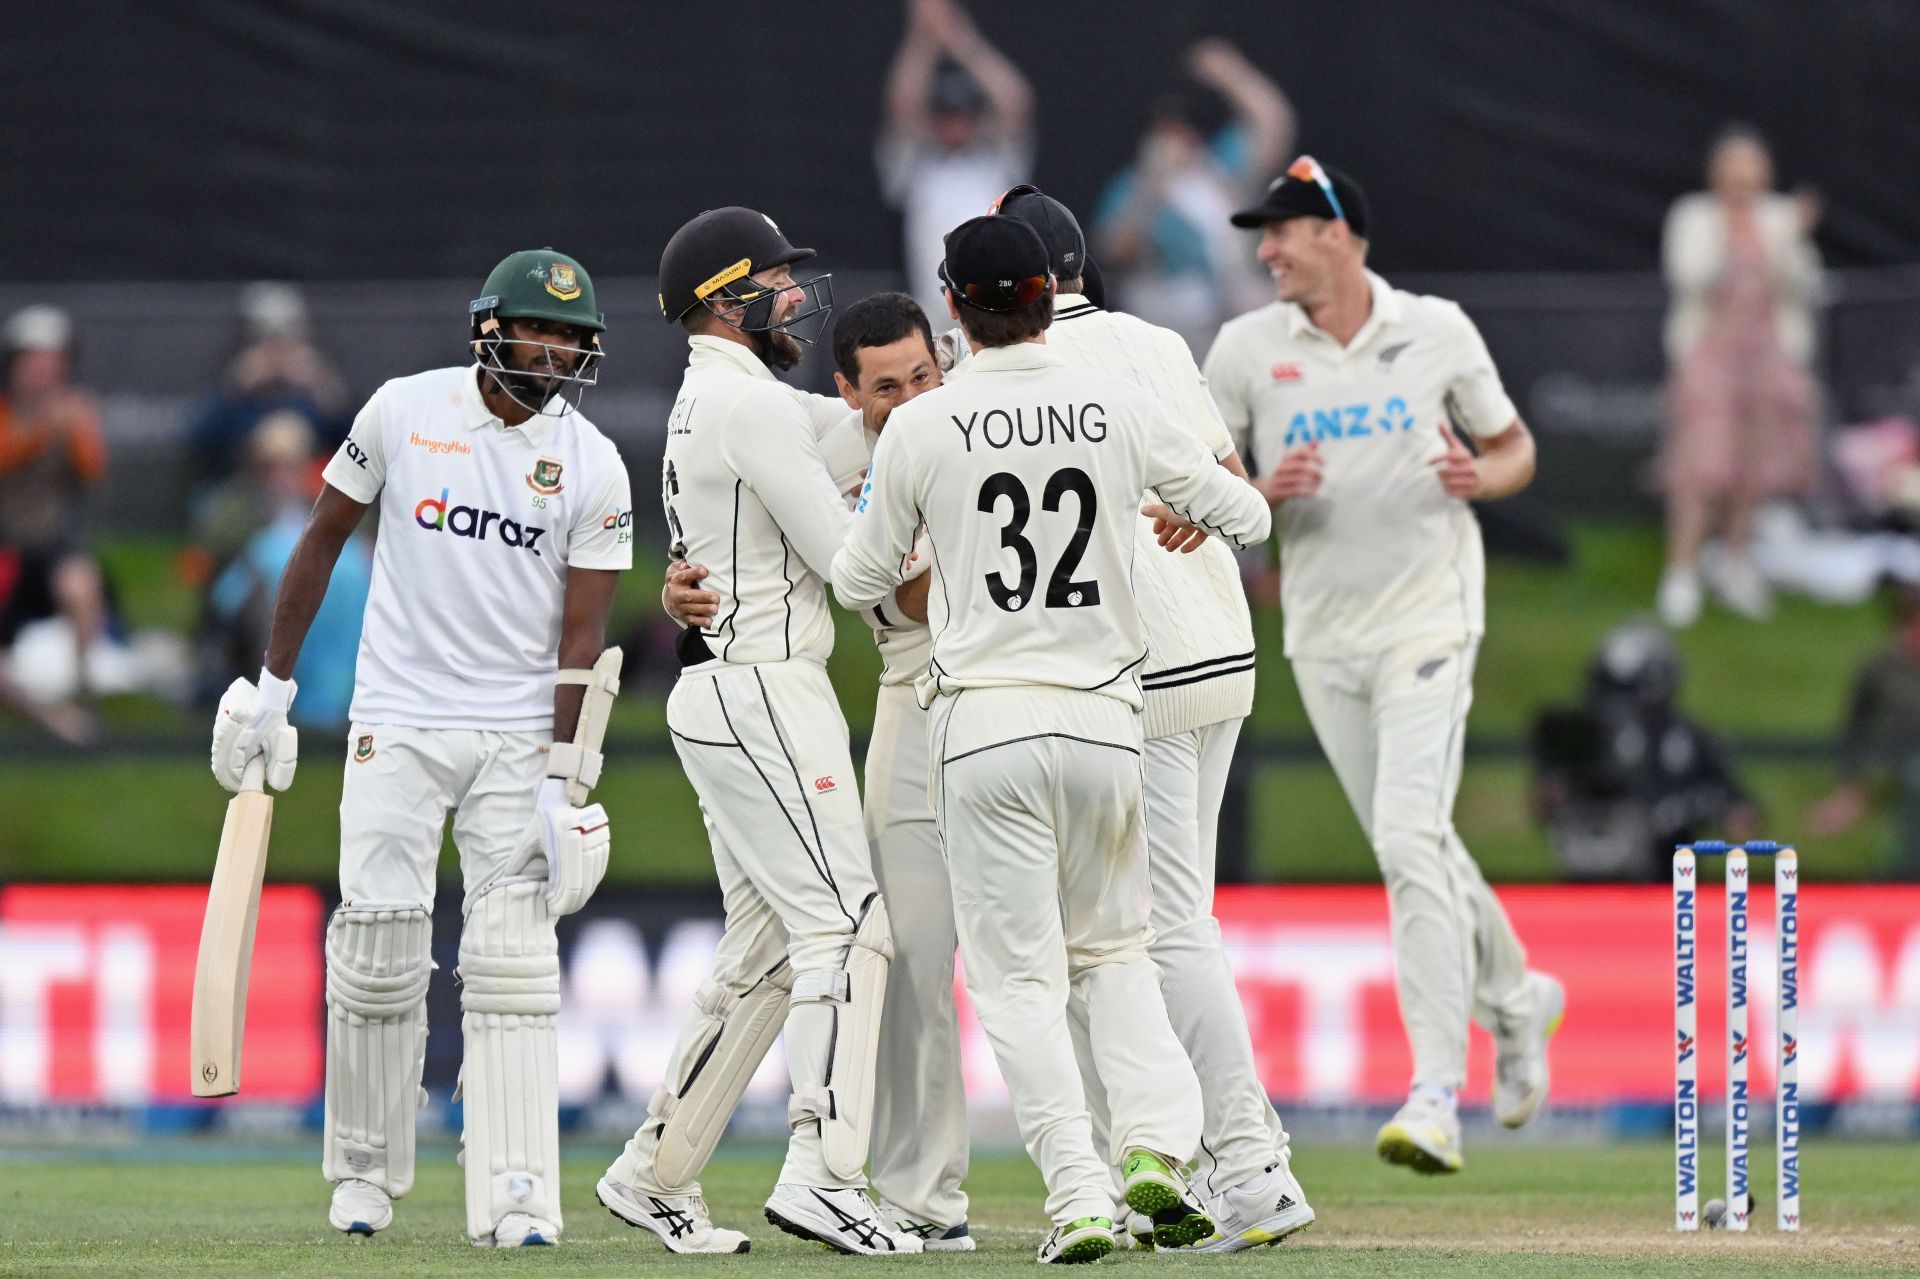 Defending champions New Zealand registered their first win in the new ICC World Test Championship cycle